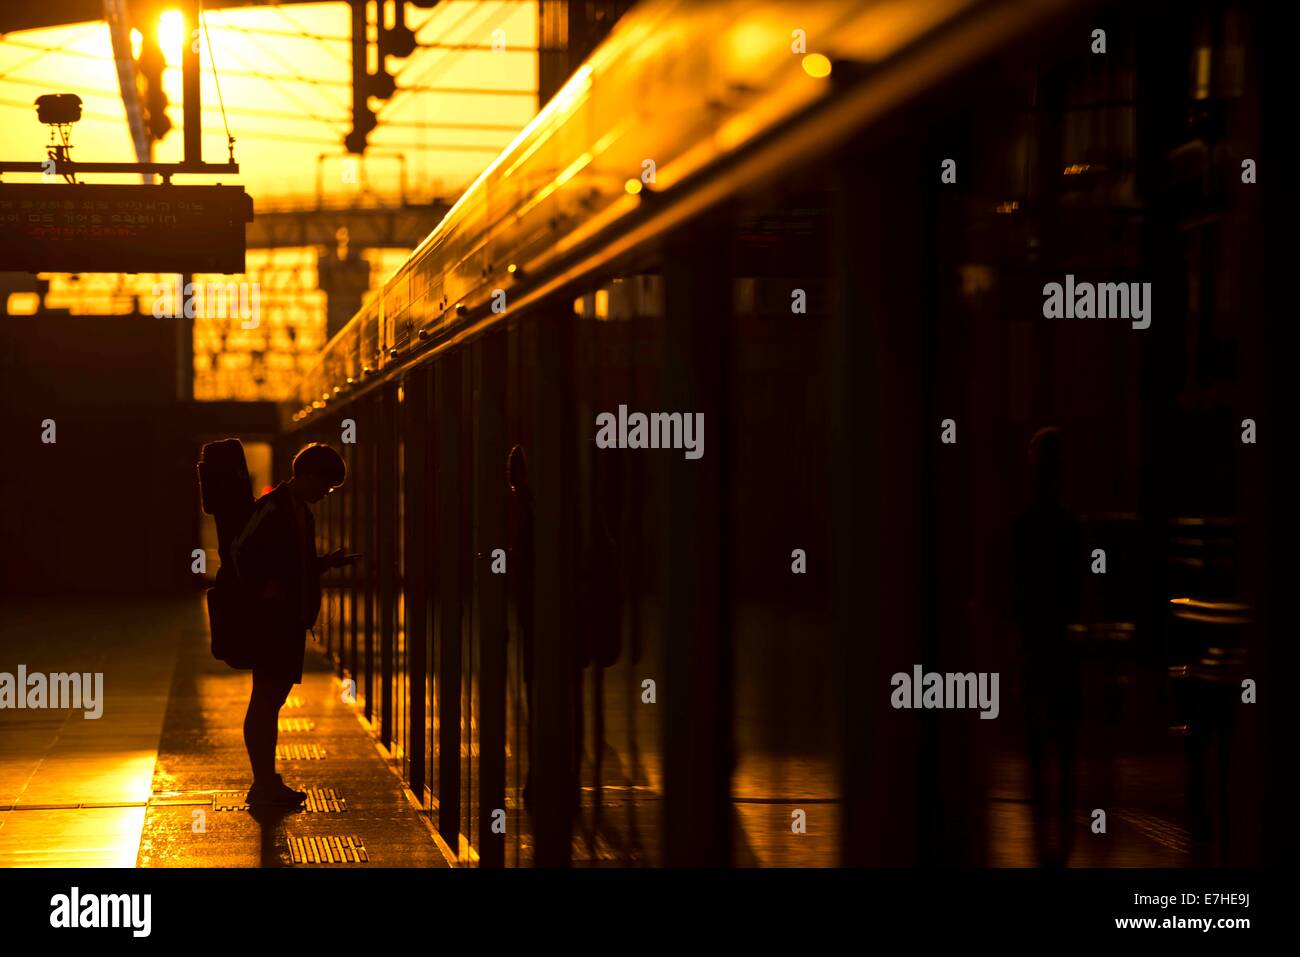 Incheon, South Korea. 18th Sep, 2014. A citizen waits for metro train at a station in Incheon, South Korea, Sept. 18, 2014. Incheon is the third populous city of South Korea. It is also the third city of the country to host major sports event of Asia. The opening ceremony of the 17th Asian Games will be held in Incheon on Sept. 19. Credit:  Lui Siu Wai/Xinhua/Alamy Live News Stock Photo